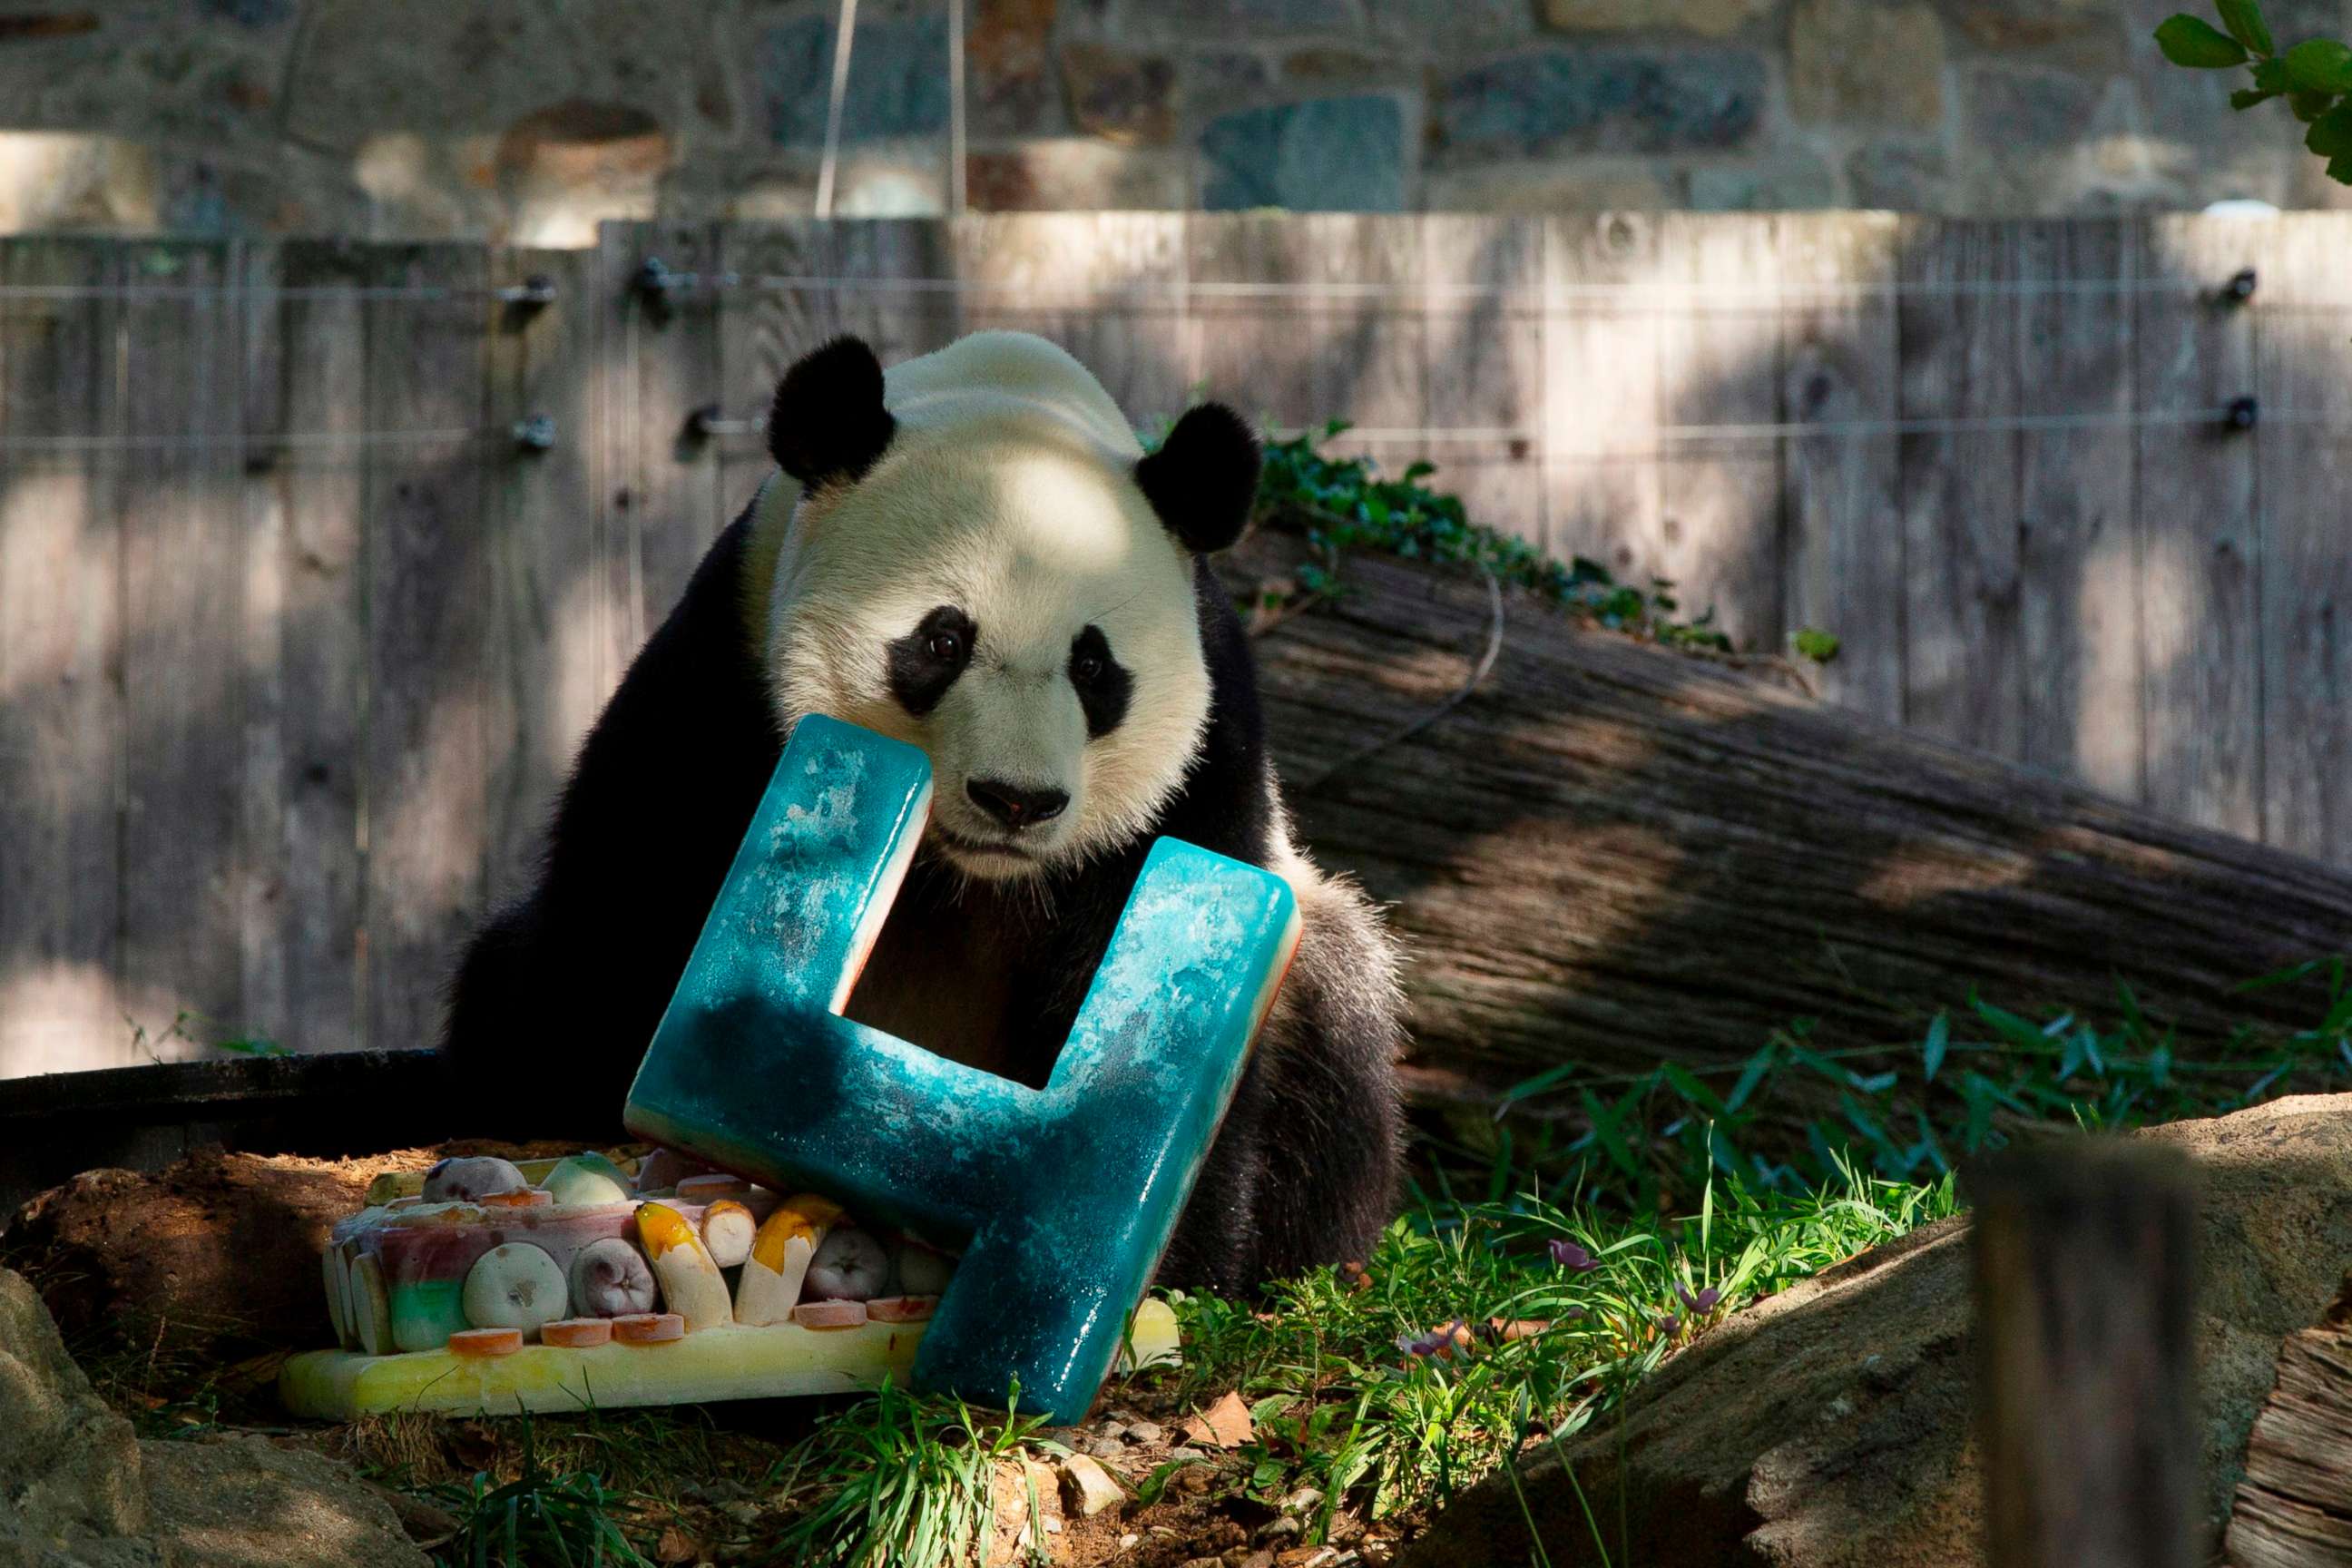 PHOTO: Giant panda Bei Bei is pictured with his frozen 4th birthday cake at the Smithsonian National Zoo in Washington, D.C., on Aug. 22, 2019.